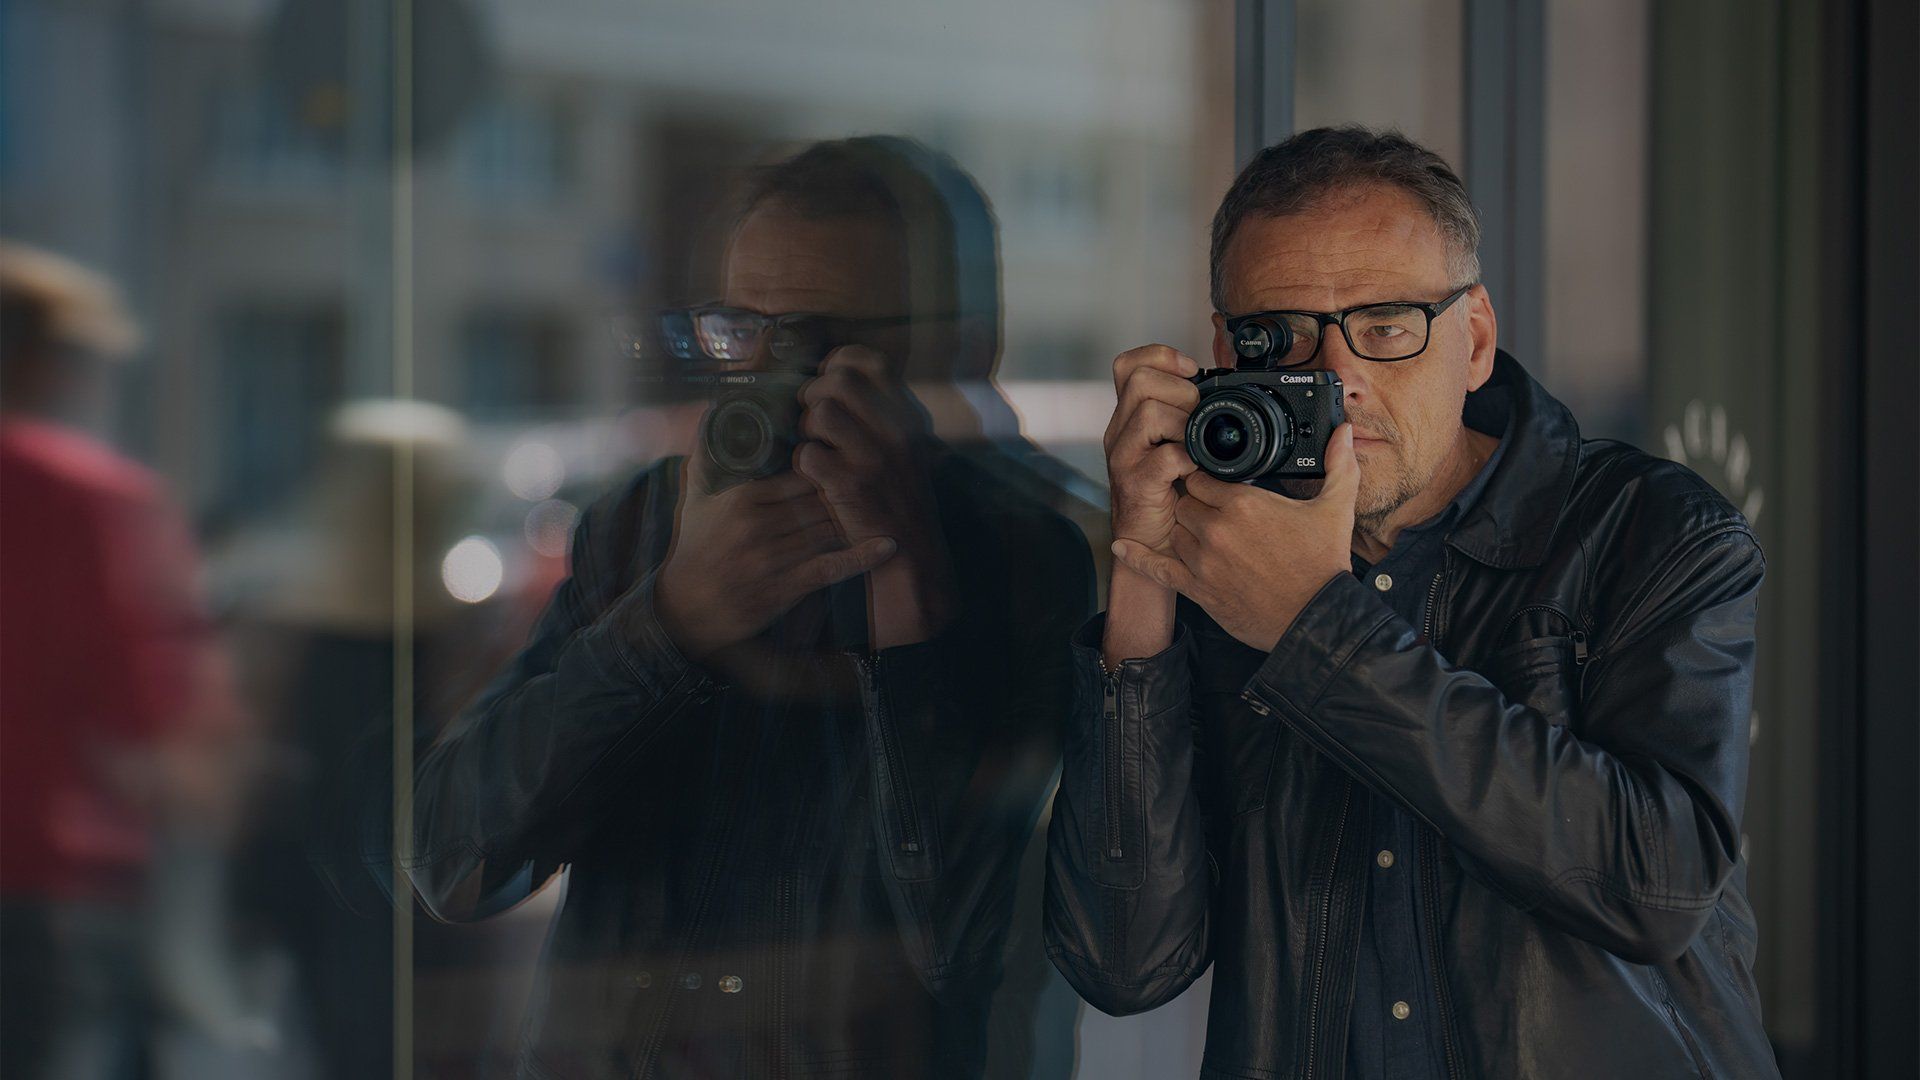 Piotr Malecki shooting on the streets of Warsaw with a Canon EOS M6 Mark II.